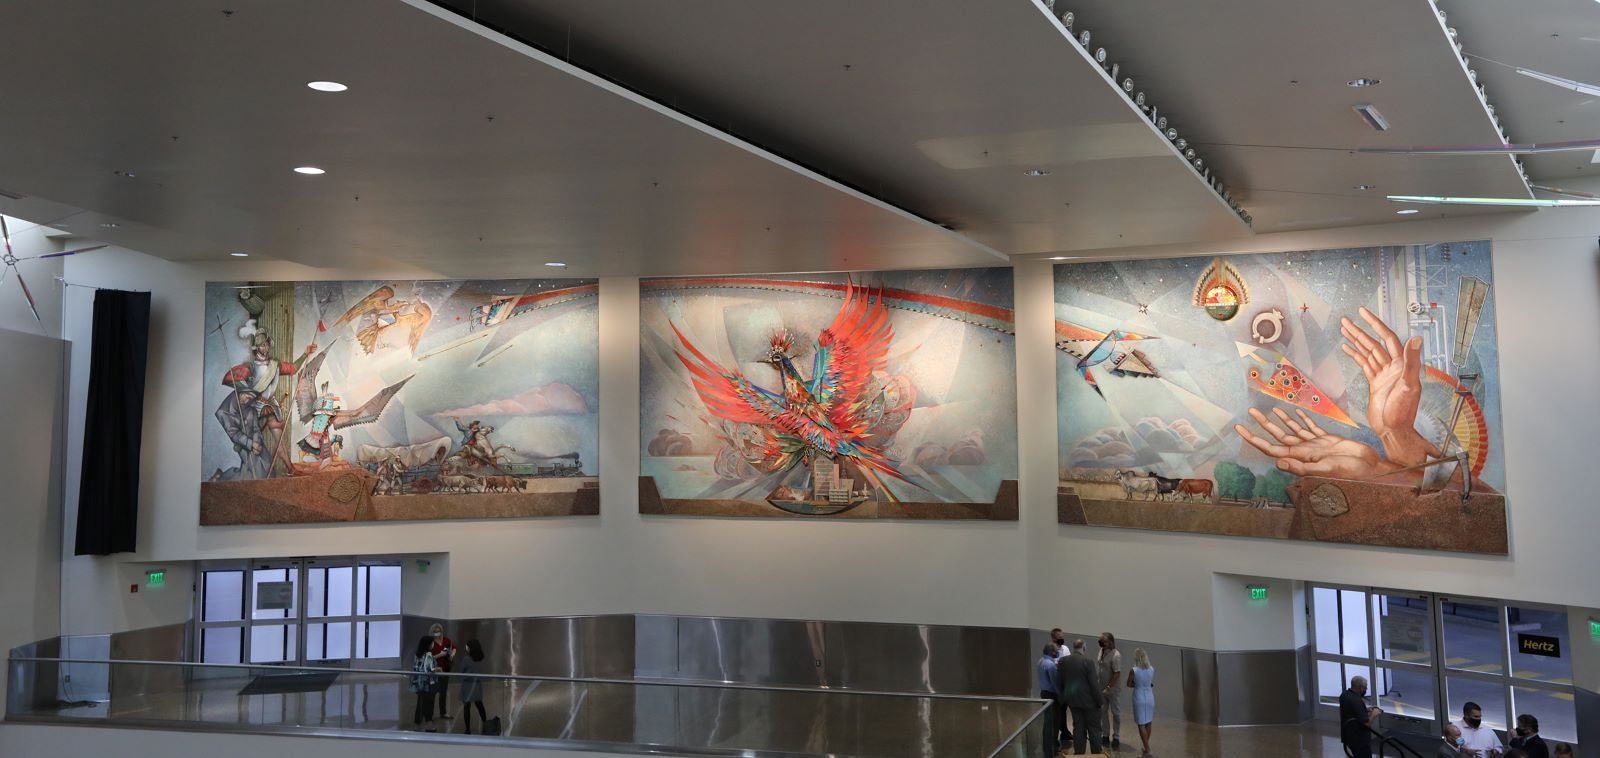 How PHX Airport managed to move and save a historic mural